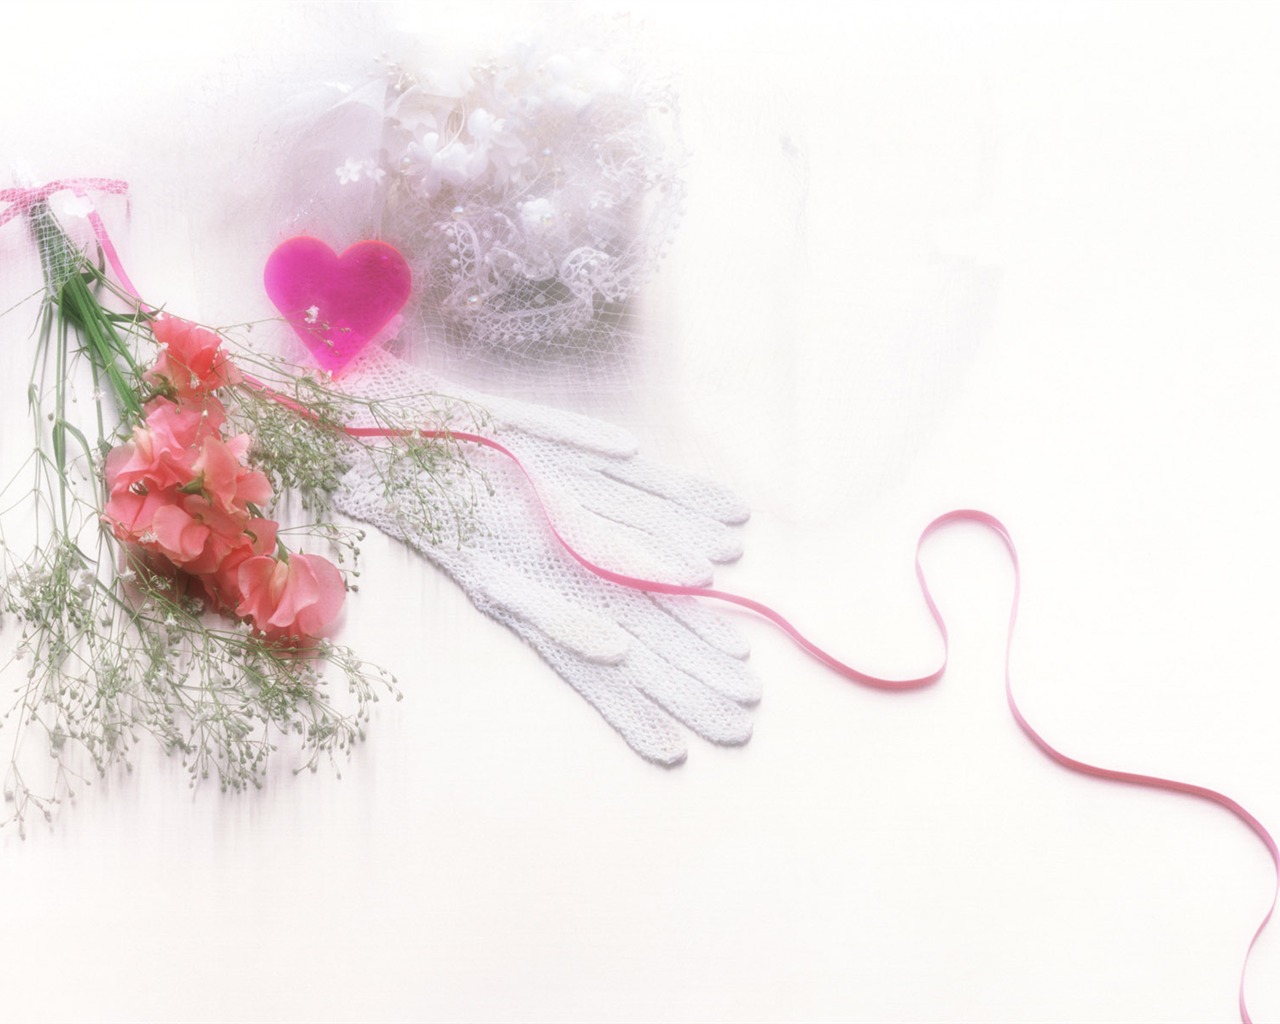 Wedding Flowers items wallpapers (2) #15 - 1280x1024